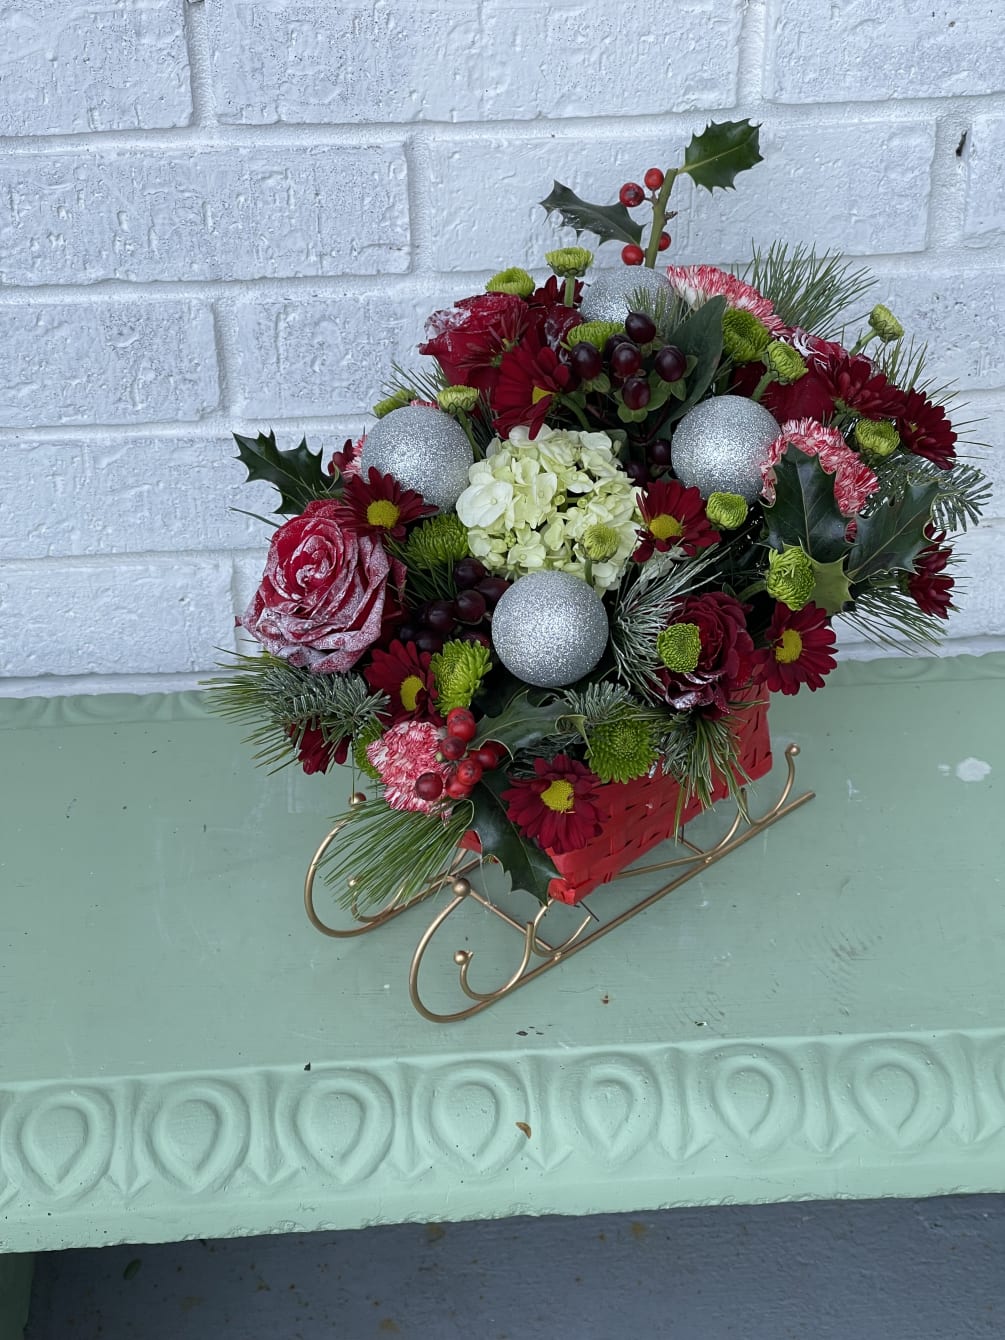 This beautiful sleigh is filled with a variety of christmas flowers, greenery